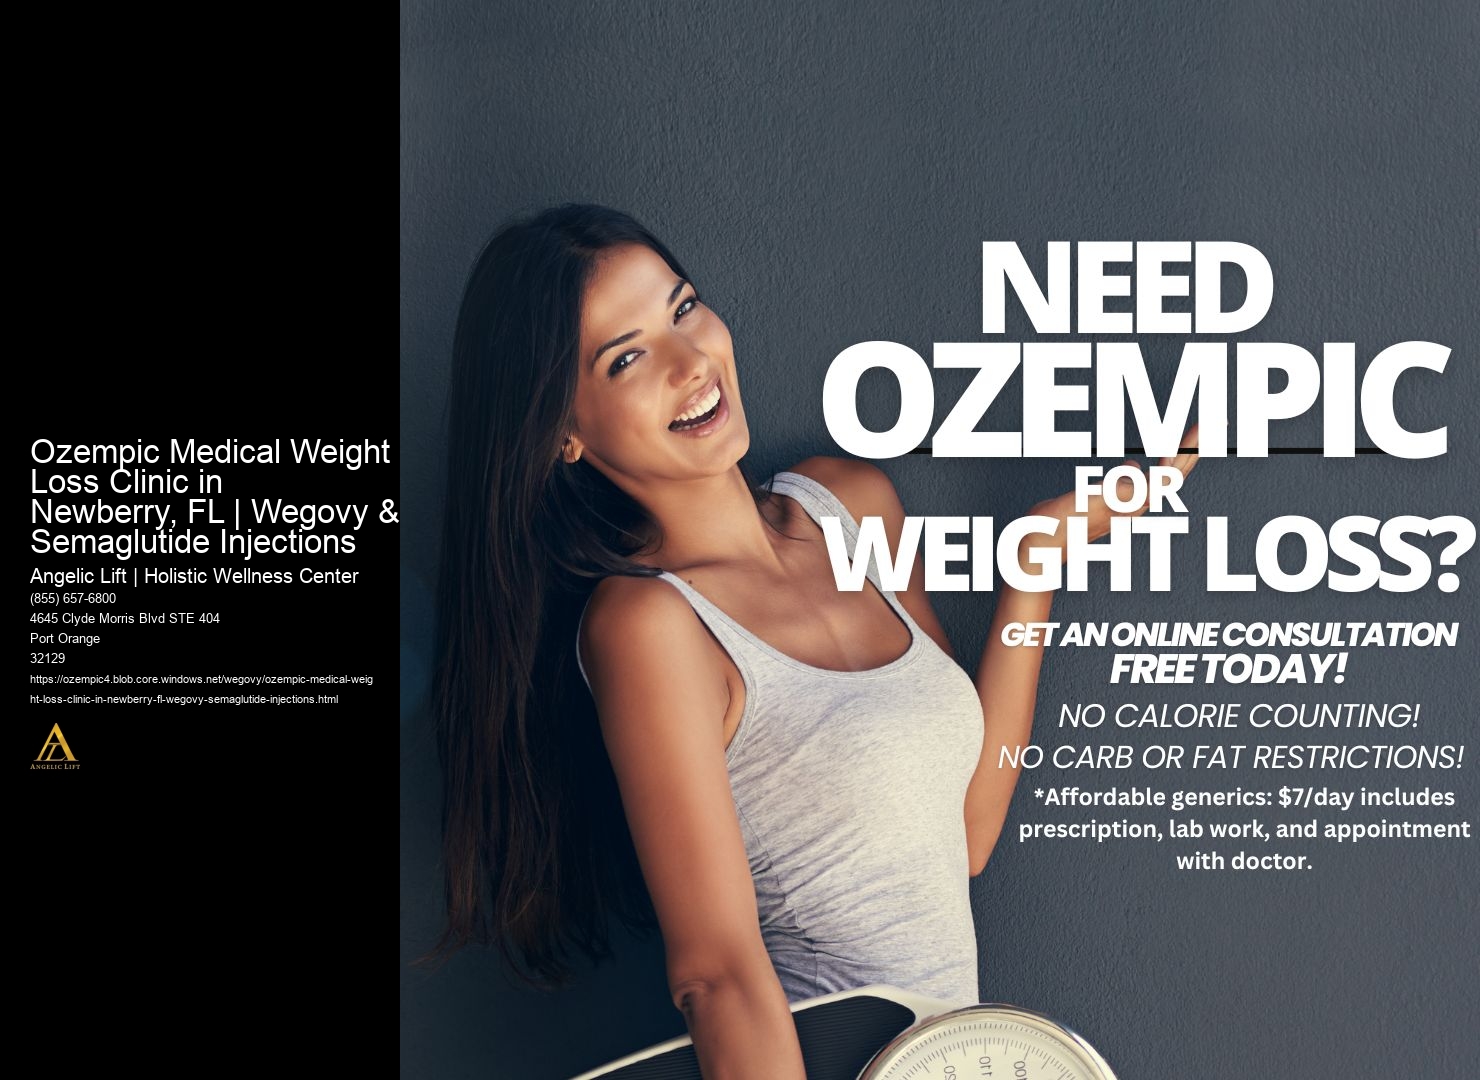 Ozempic Medical Weight Loss Clinic in Newberry, FL | Wegovy & Semaglutide Injections